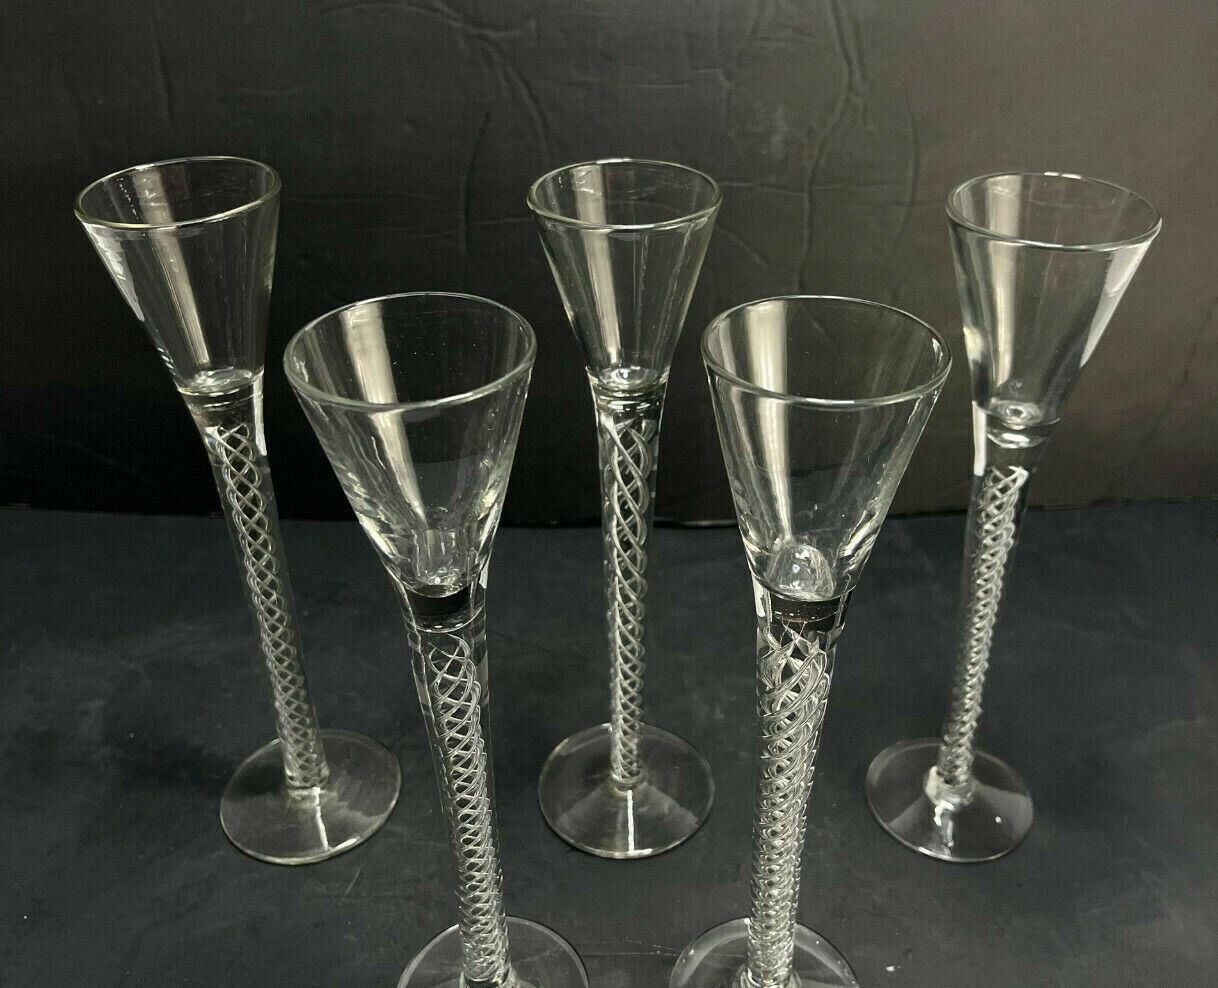 5 Victorian English glass wine goblets, air twist stems, 2nd half 19th century

Airtwist to the stems. Each with rough pontils to the underside.

Additional information:
Lid Type: Twist 
Time Period Manufactured: 1850-1899
Material: Glass